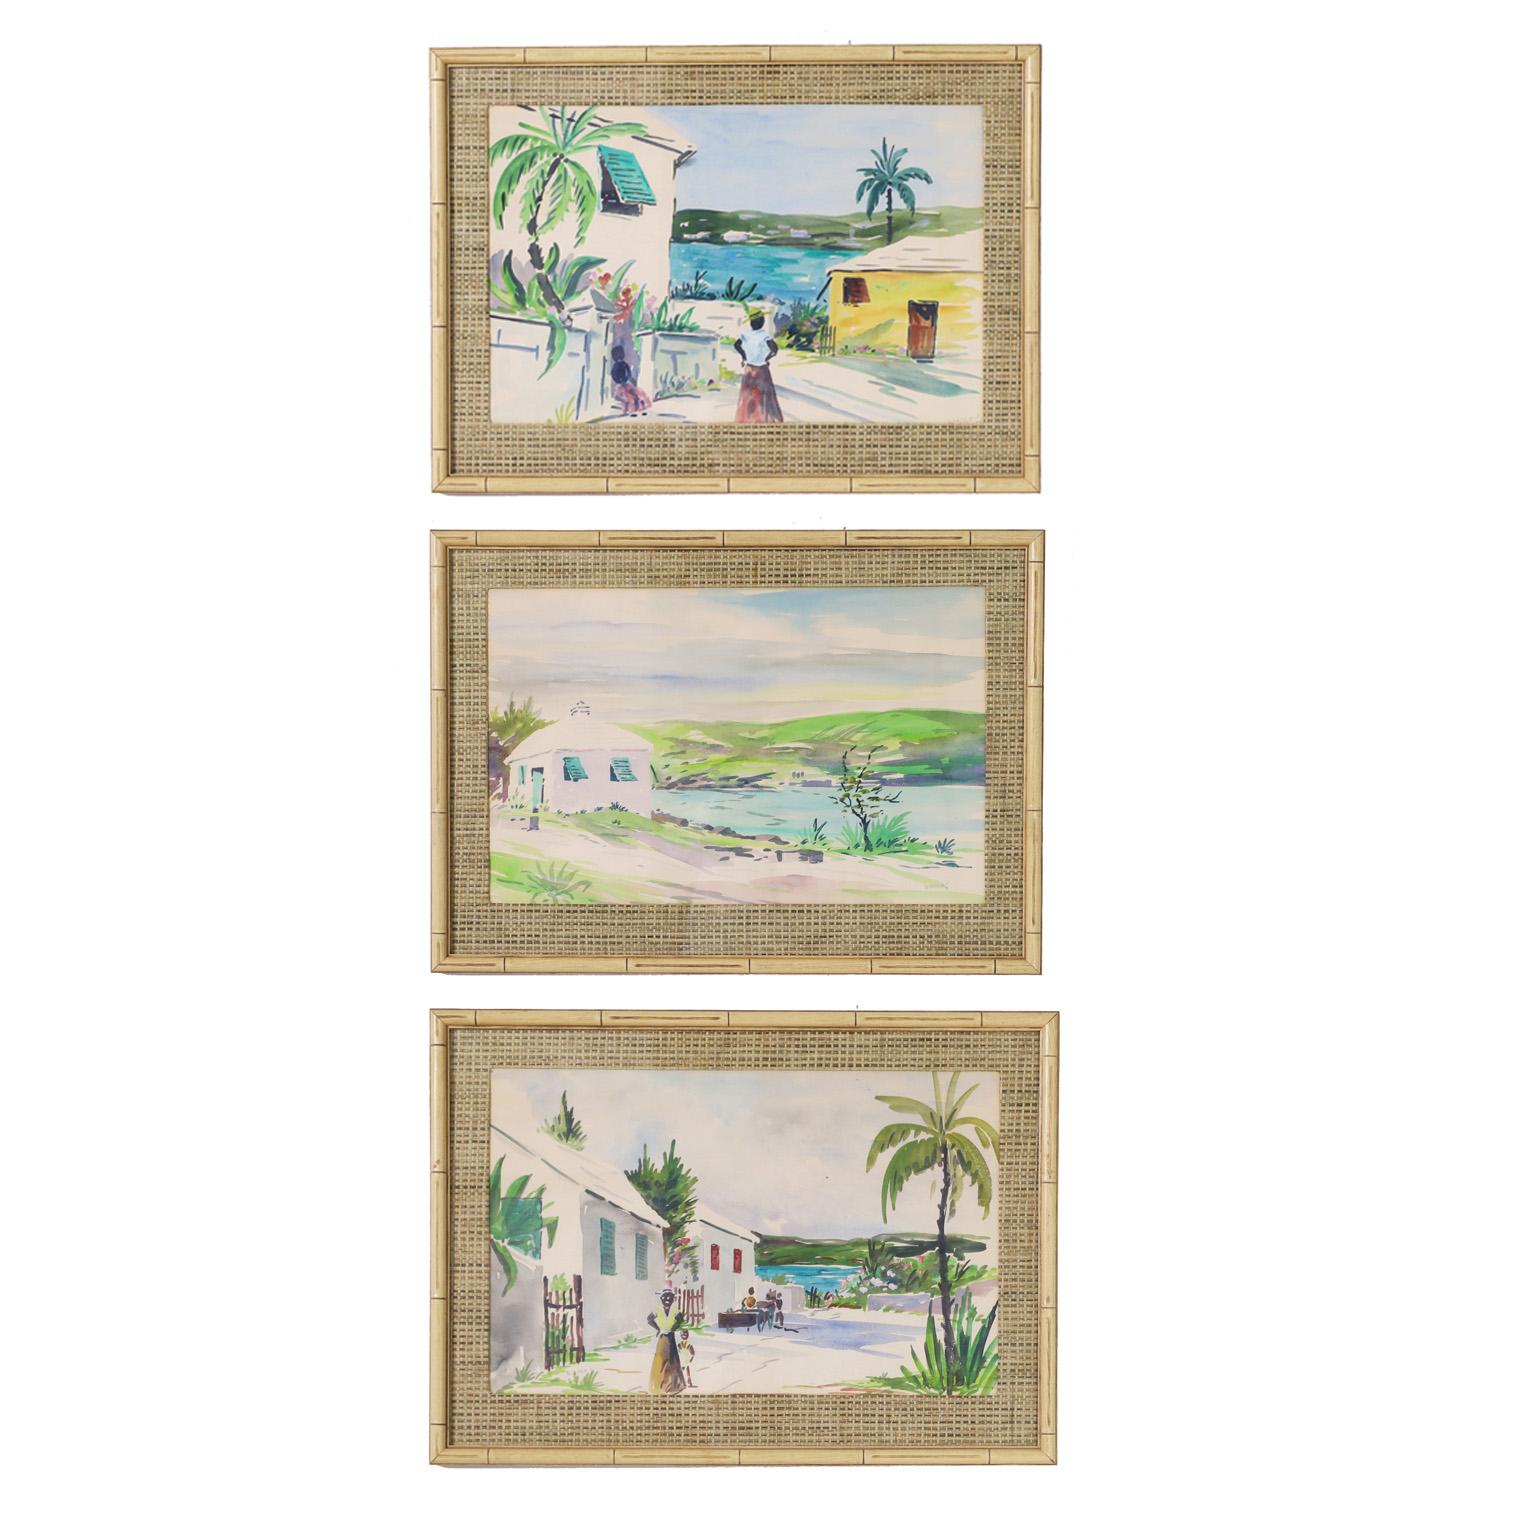 Striking group of three tropical watercolors by famed Bermuda painter Alfred Birdsey known for his impressionist style and vibrant colors. Presented under glass with grasscloth mats and faux bamboo frames.